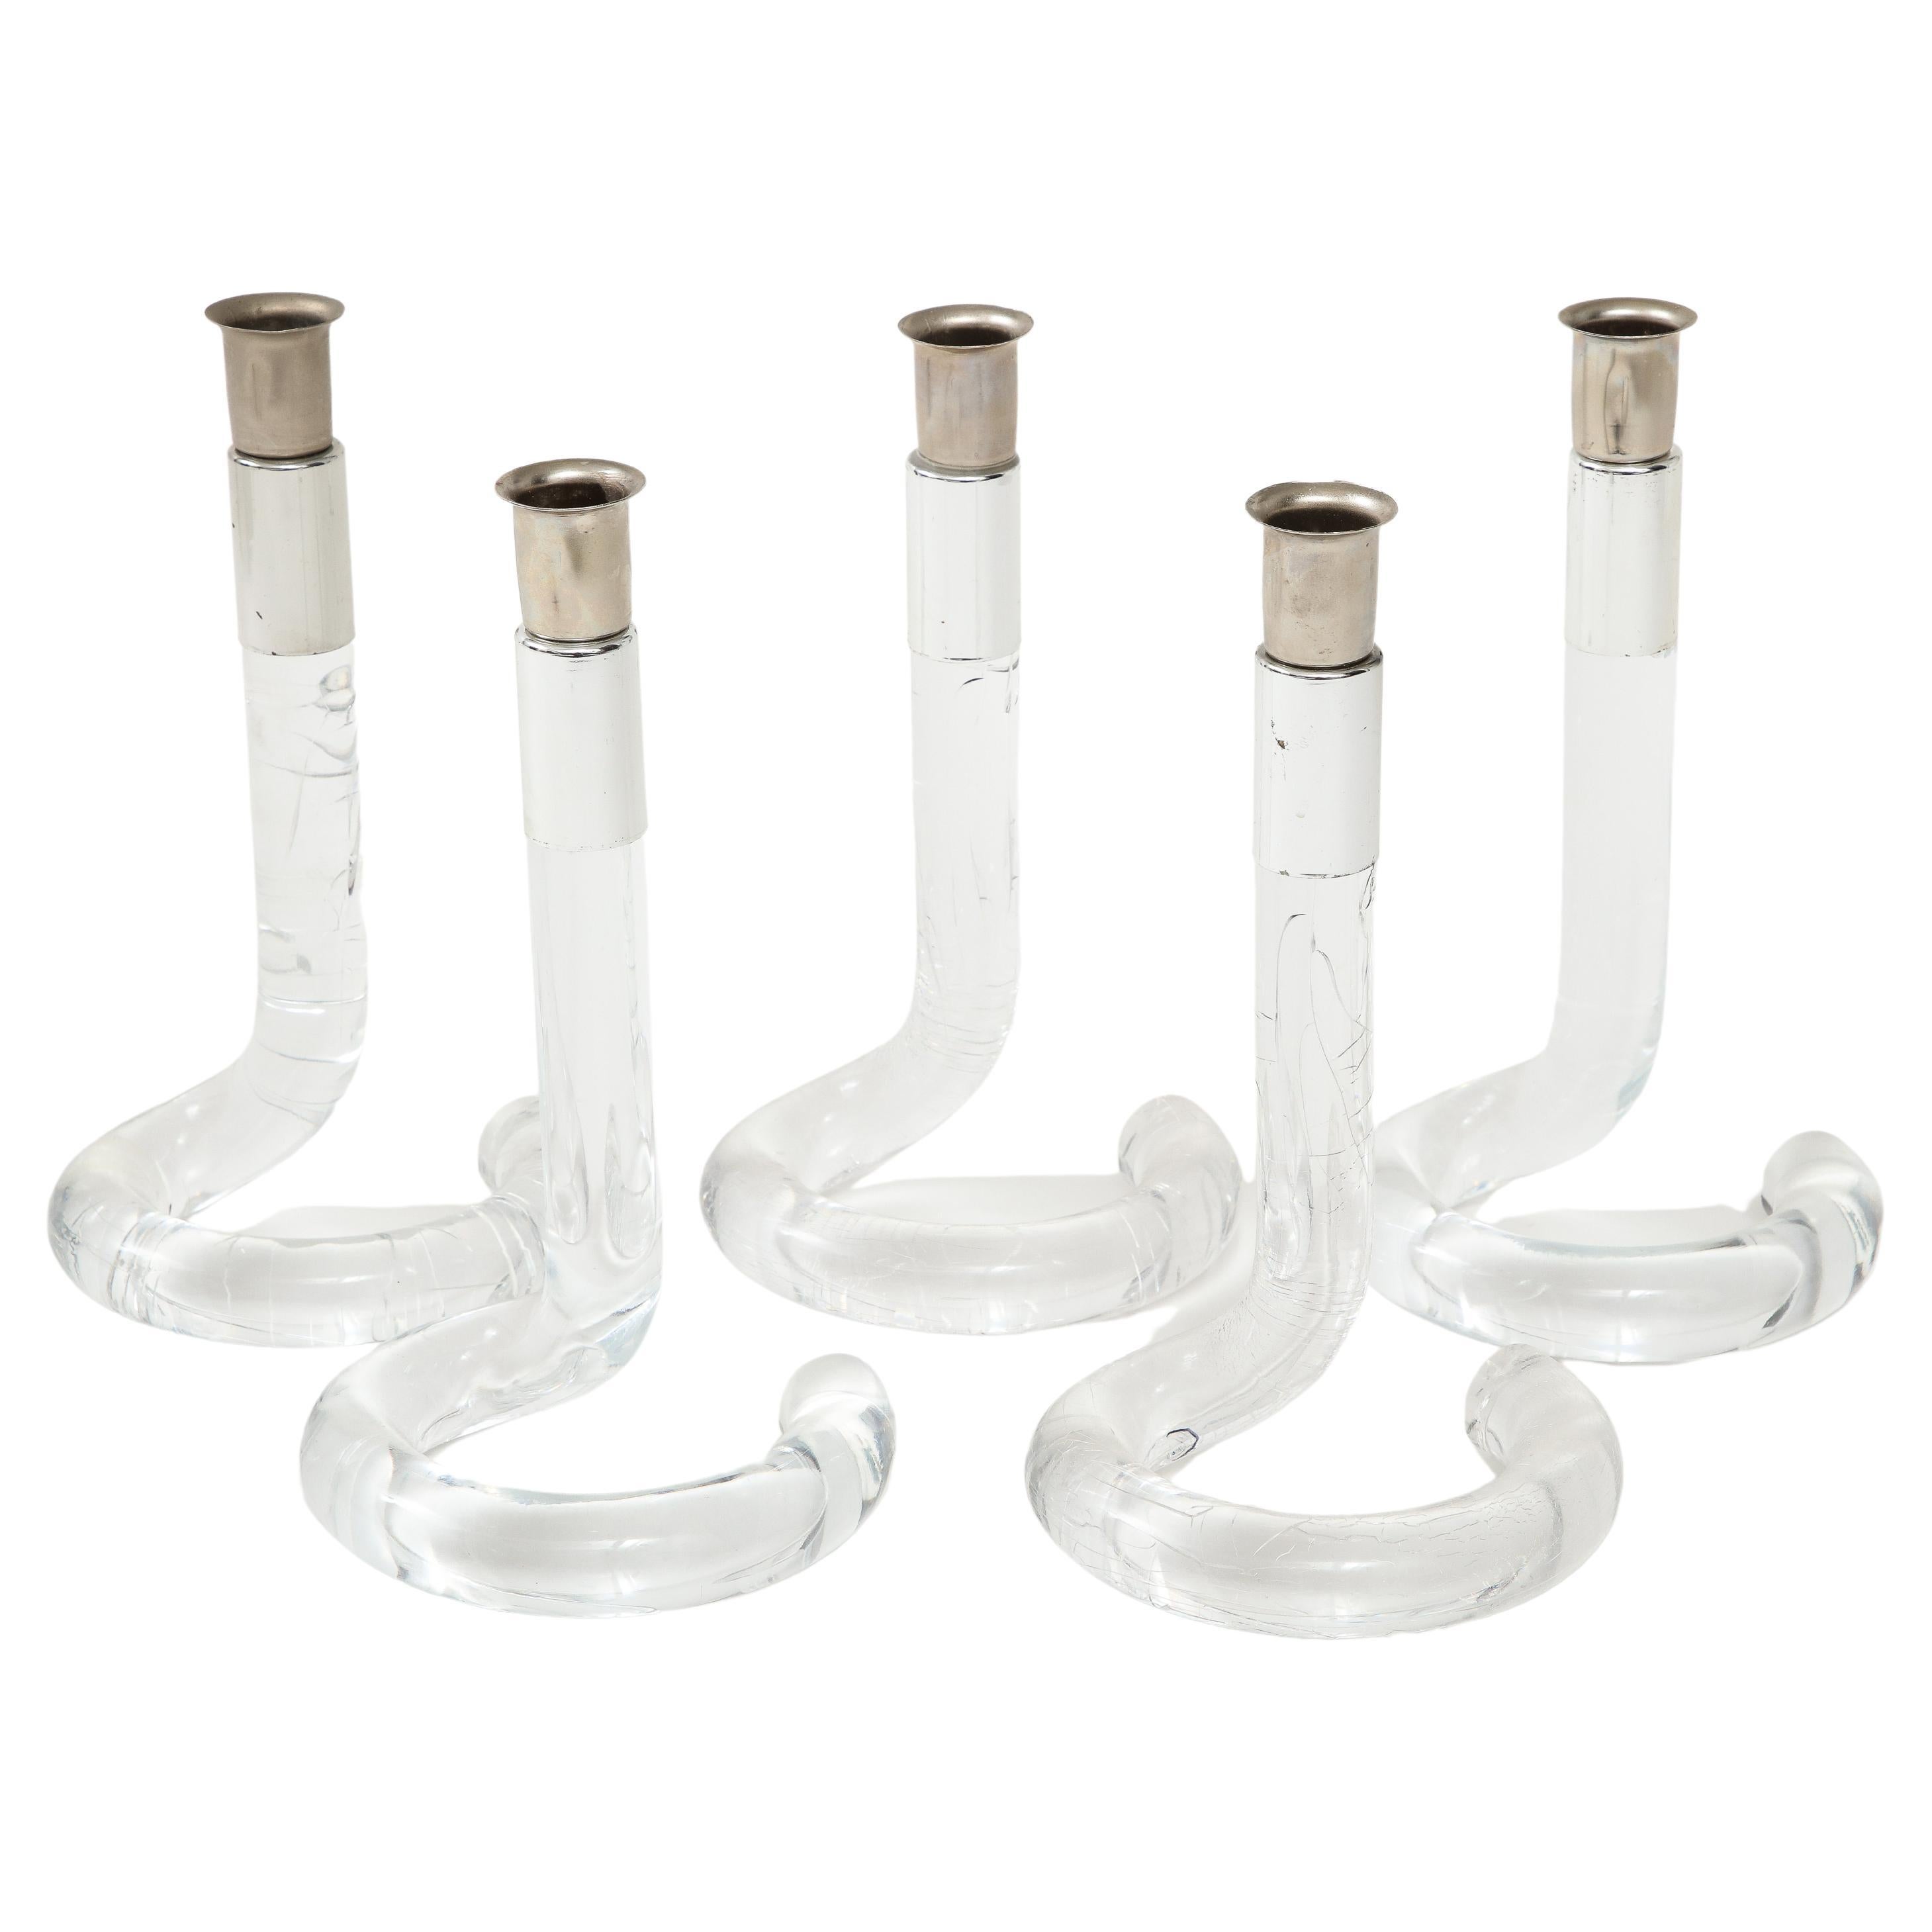 Set of 5 Dorothy Thorpe Lucite Candlesticks For Sale